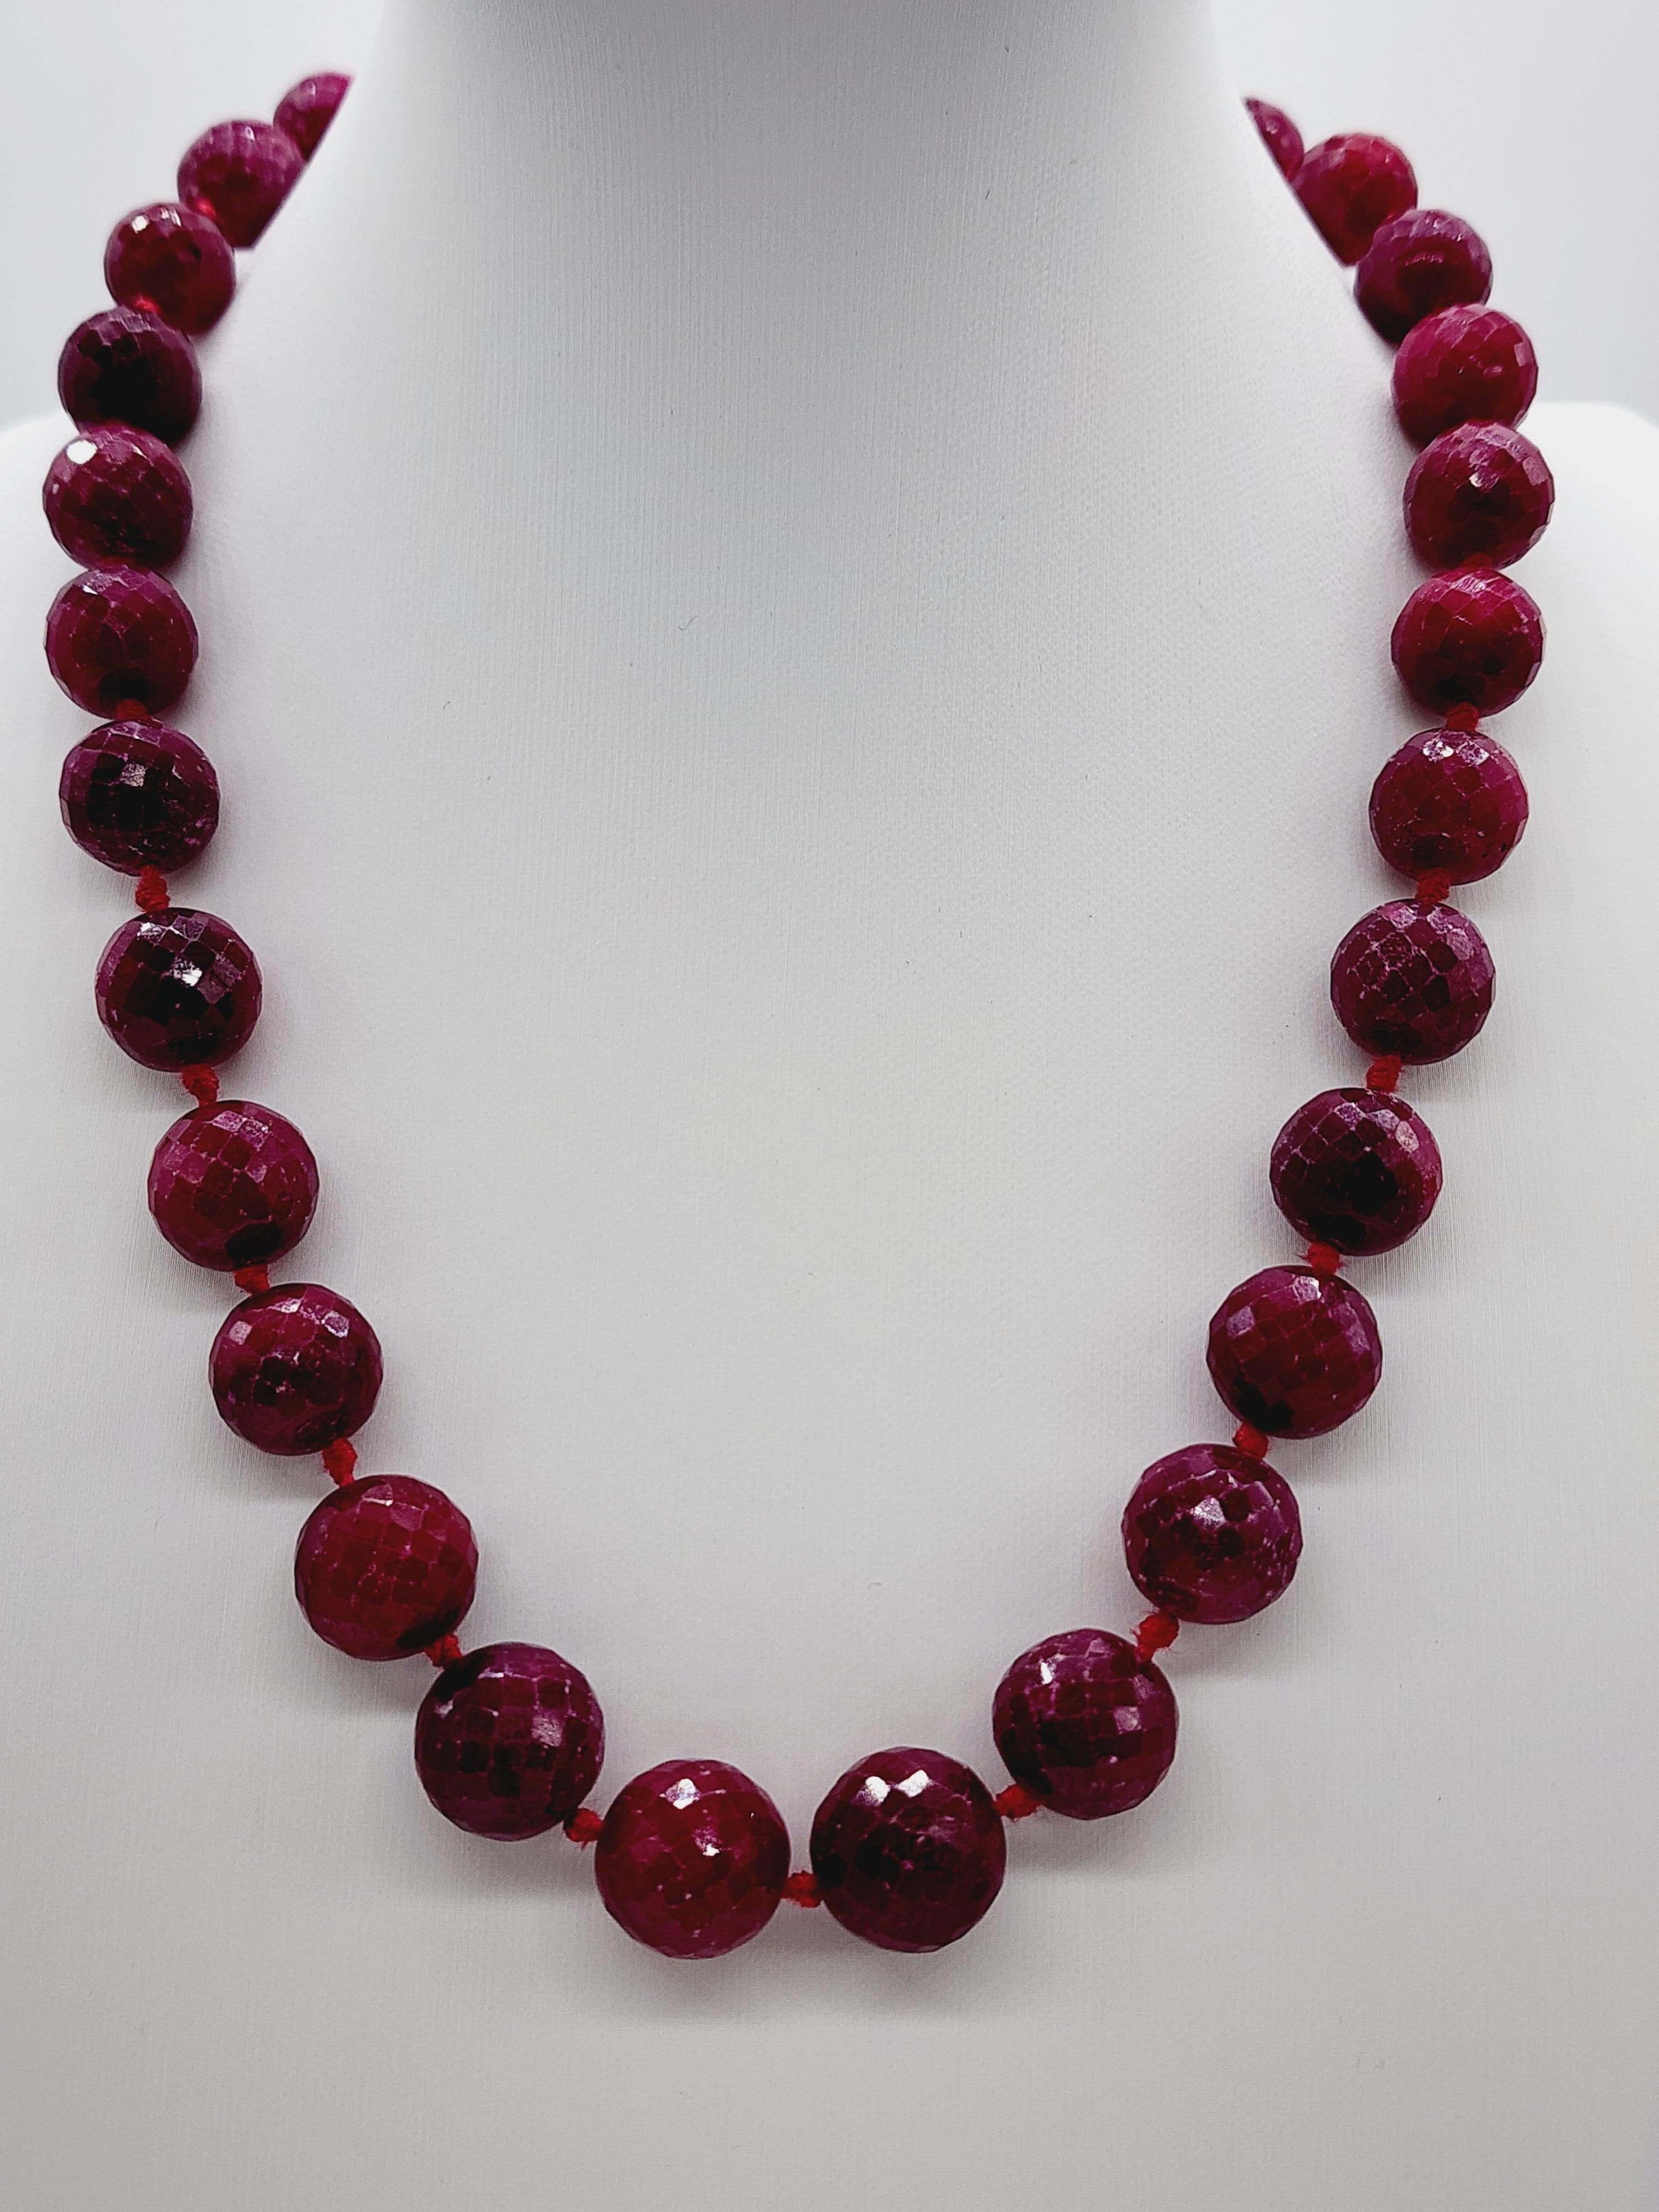 483.60 CARATS RUBY BEADED NECKLACE YELLOW GOLD 14 KARAT.
17 inch. 

*Free shipping in the U.S.*